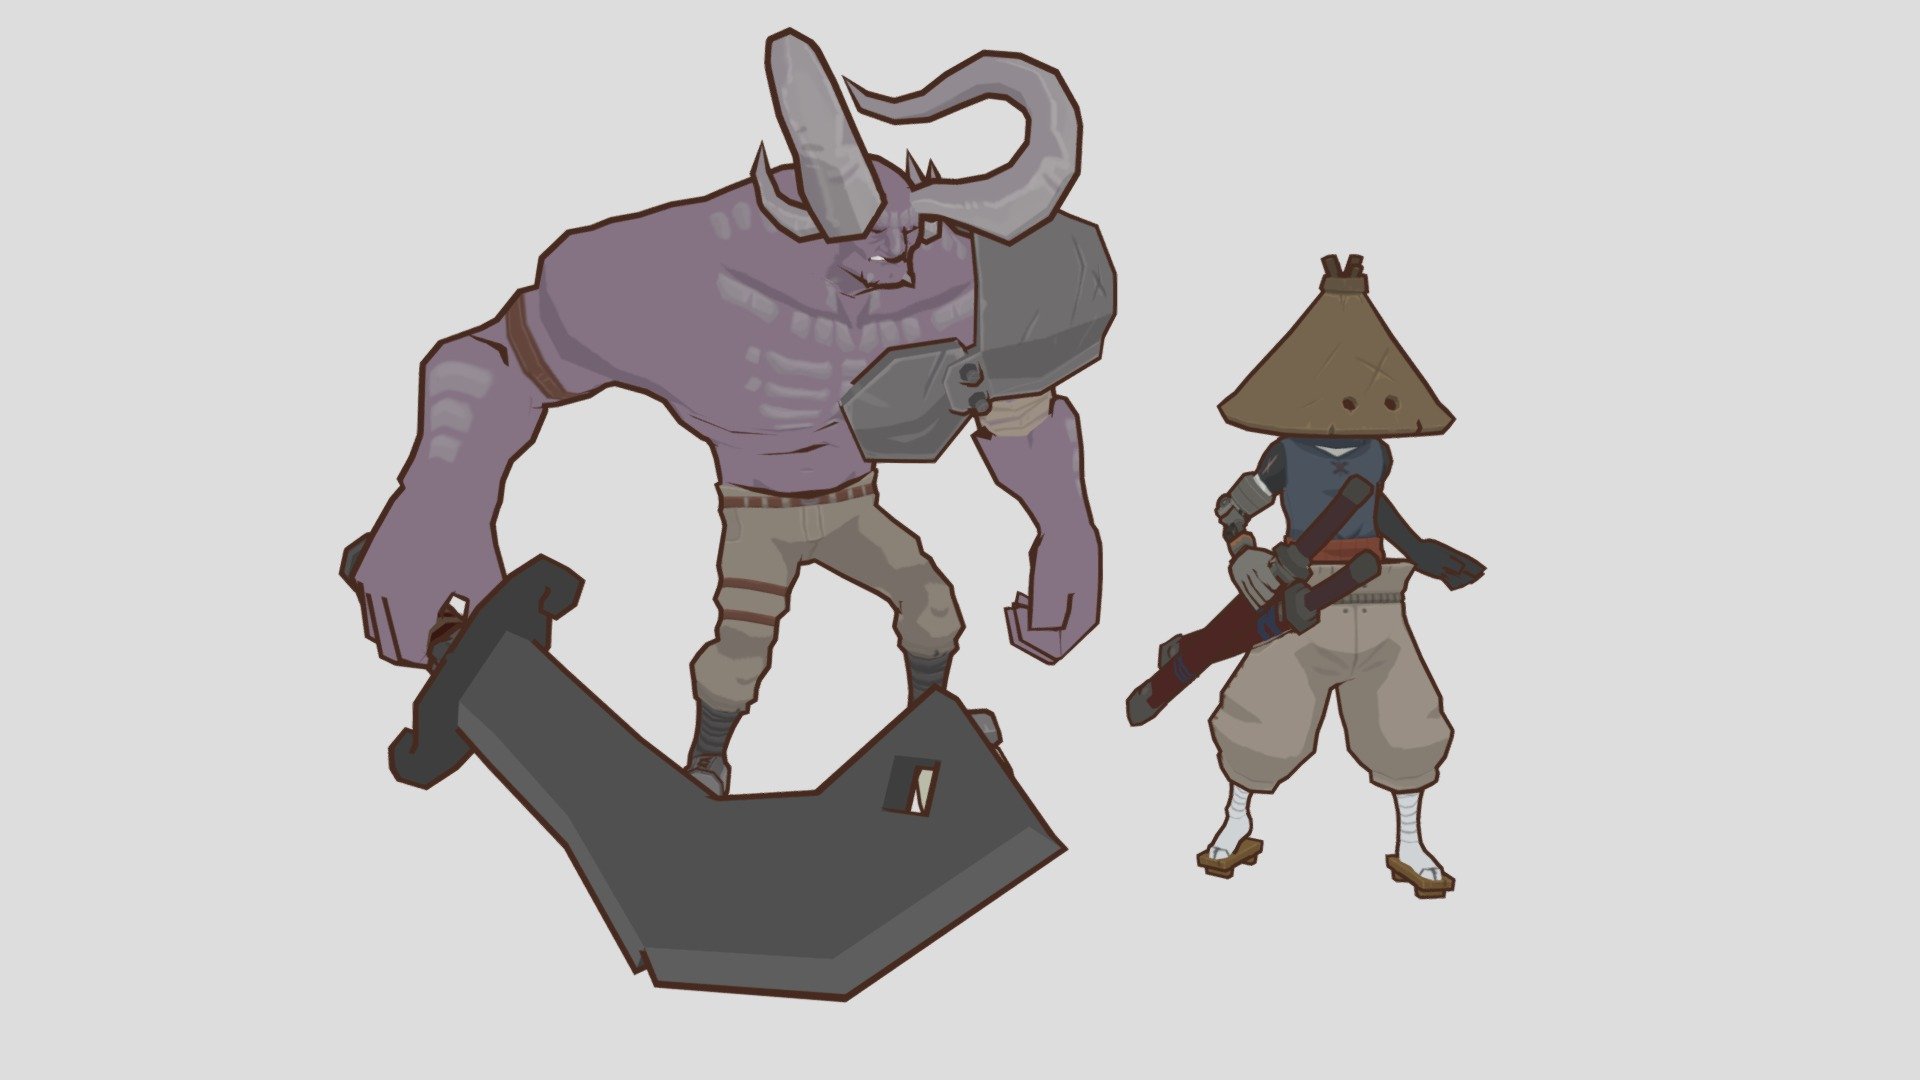 I love kenshi, I've dumped tons of hours into that game. I decided to do some loosely wind-waker inspired fan art. This is my main gank squad in kenshi, peace the scorchlander and papa the shek 3d model